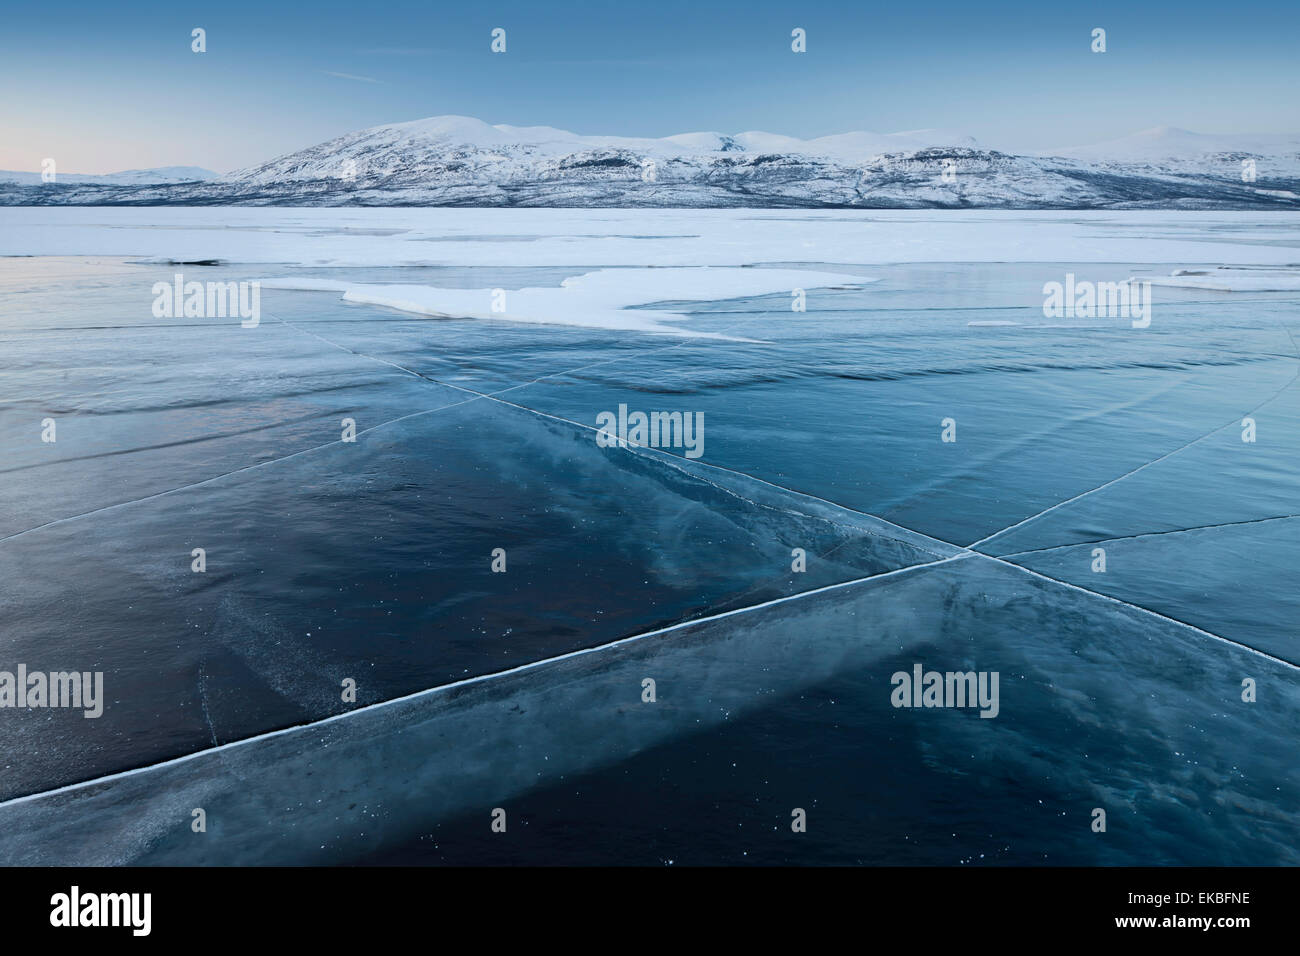 A frozen lake, so clear its possible to see through the ice, near Absiko, Sweden, Scandinavia, Europe Stock Photo